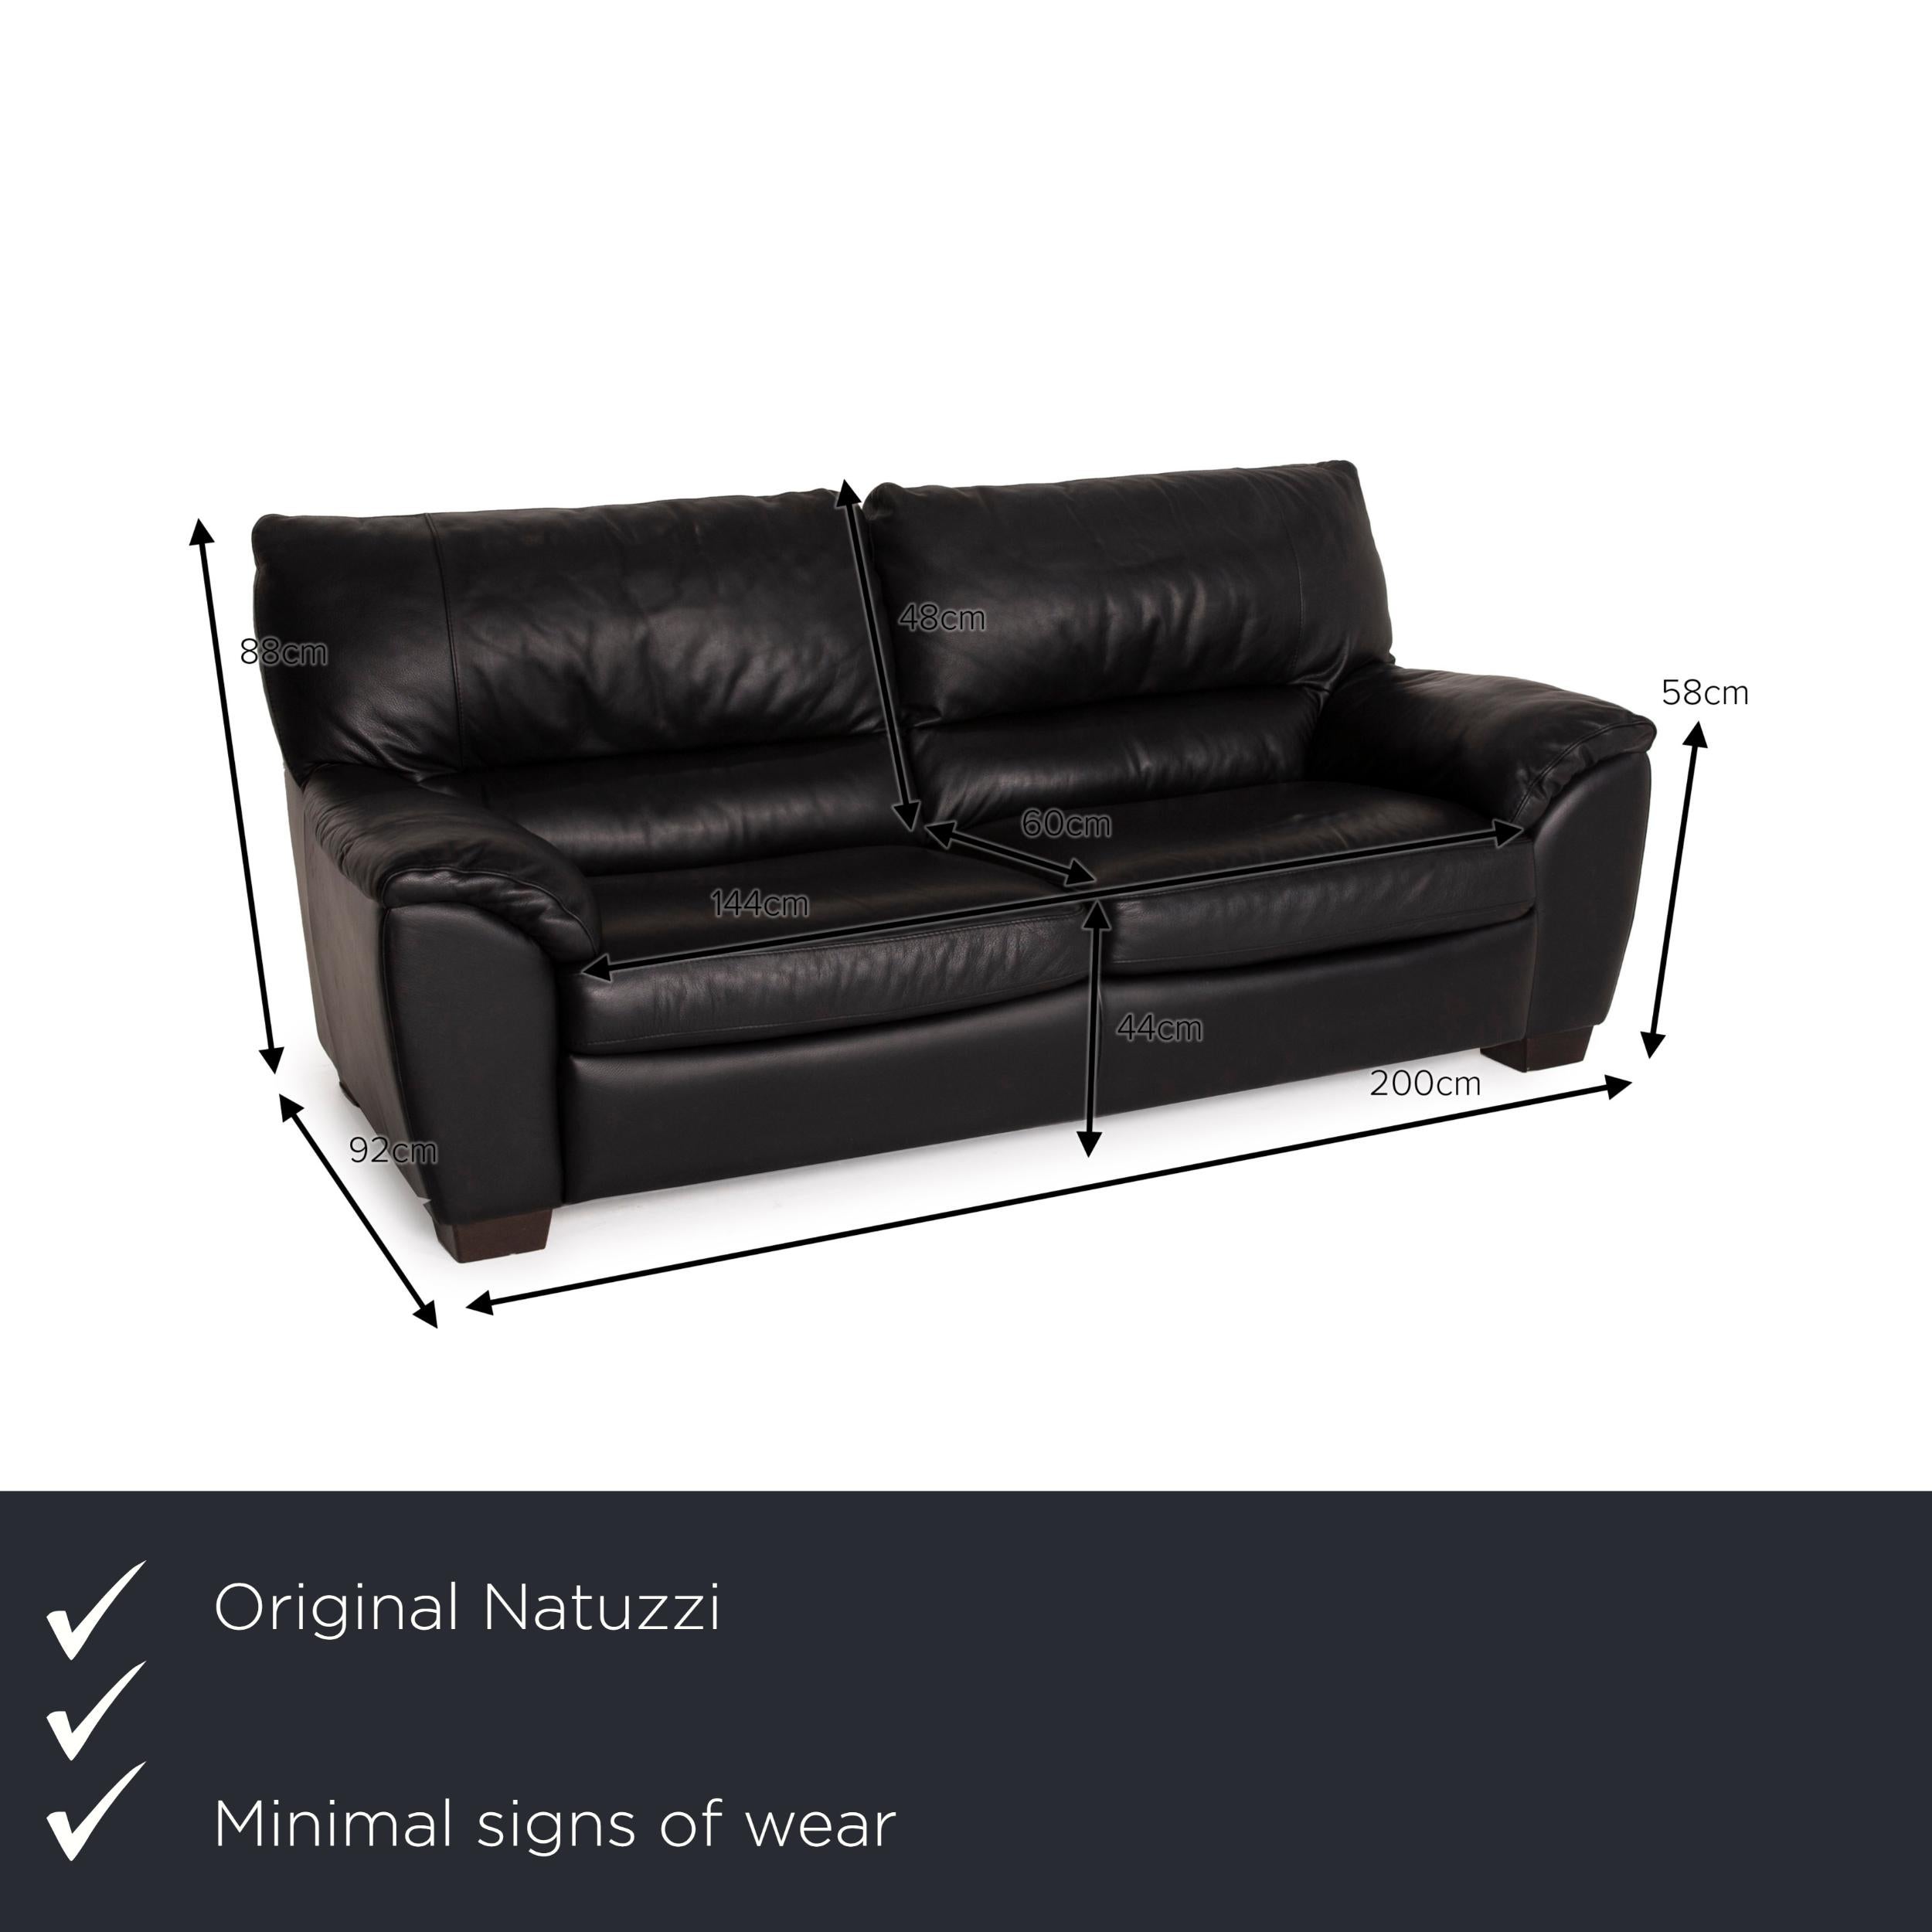 We present to you a Natuzzi two-seater leather sofa black.


 Product measurements in centimeters:
 

Depth: 92
Width: 200
Height: 88
Seat height: 44
Rest height: 58
Seat depth: 60
Seat width: 144
Back height: 48.
 